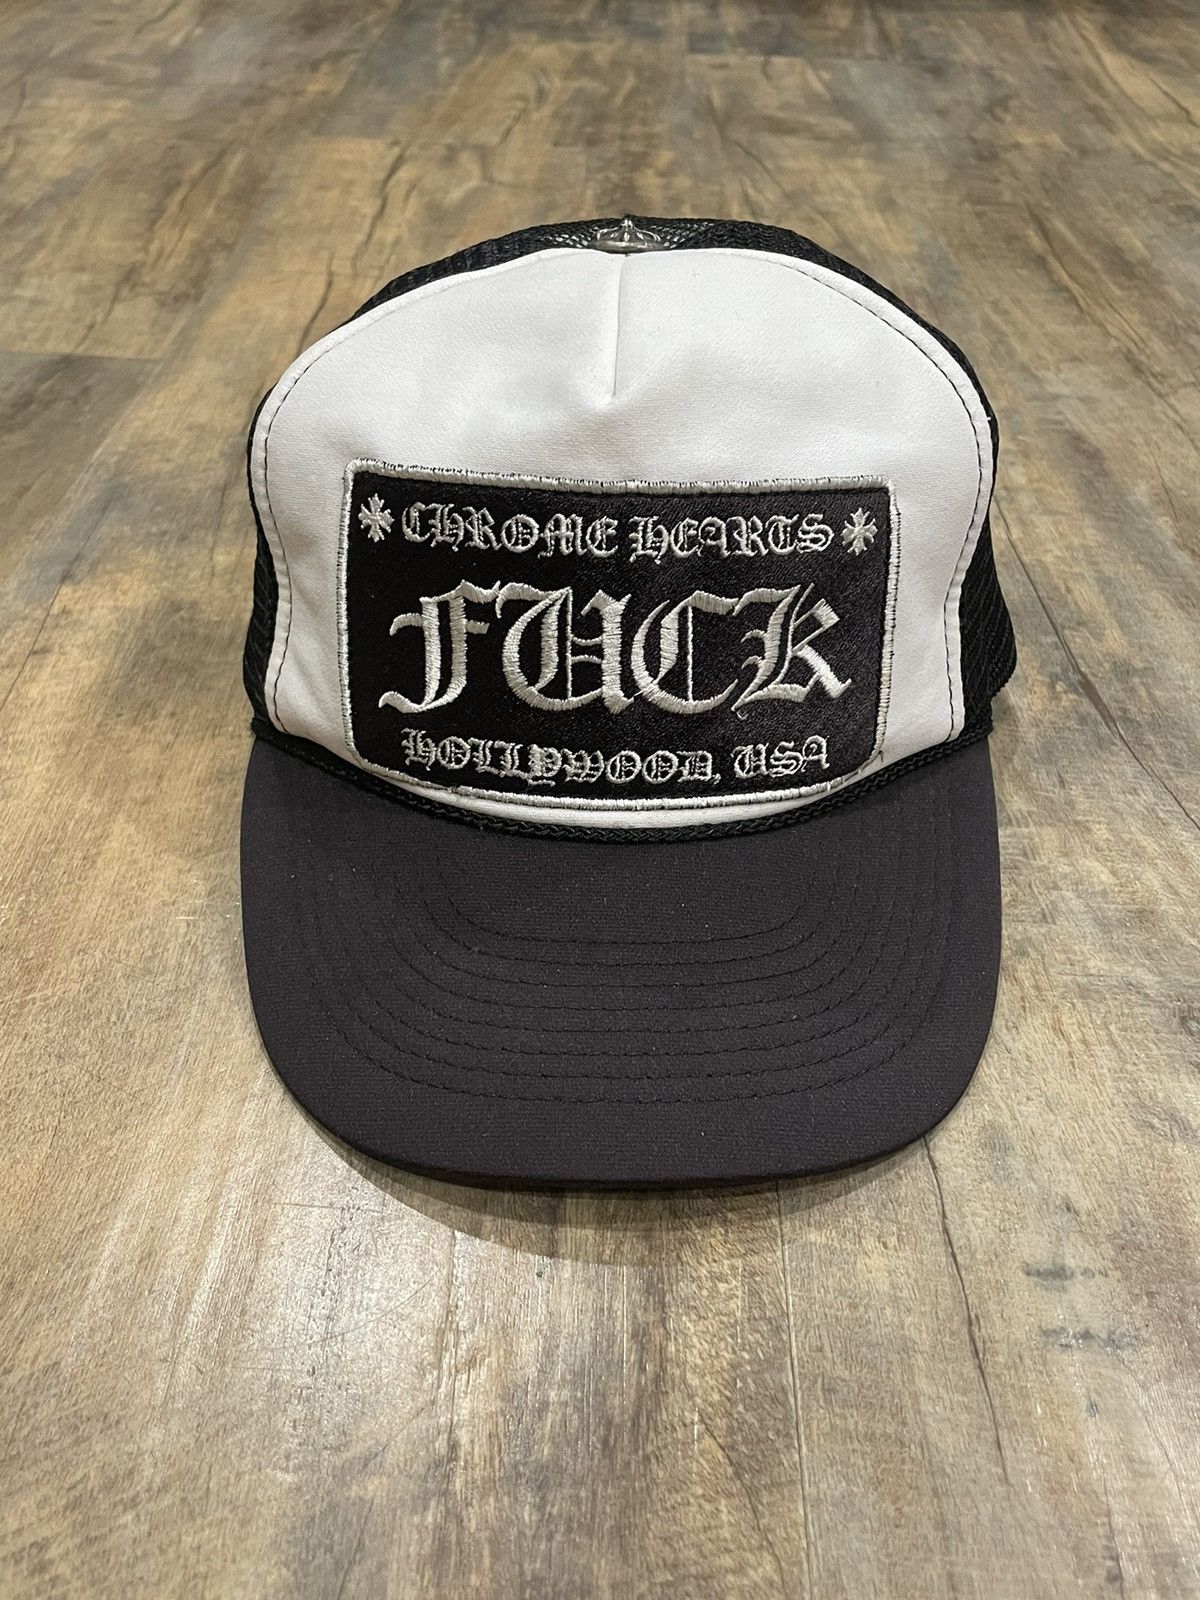 Pre-owned Chrome Hearts X Vintage Chrome Hearts Fuck Hollywood Trucker Hat Black White In Black/white